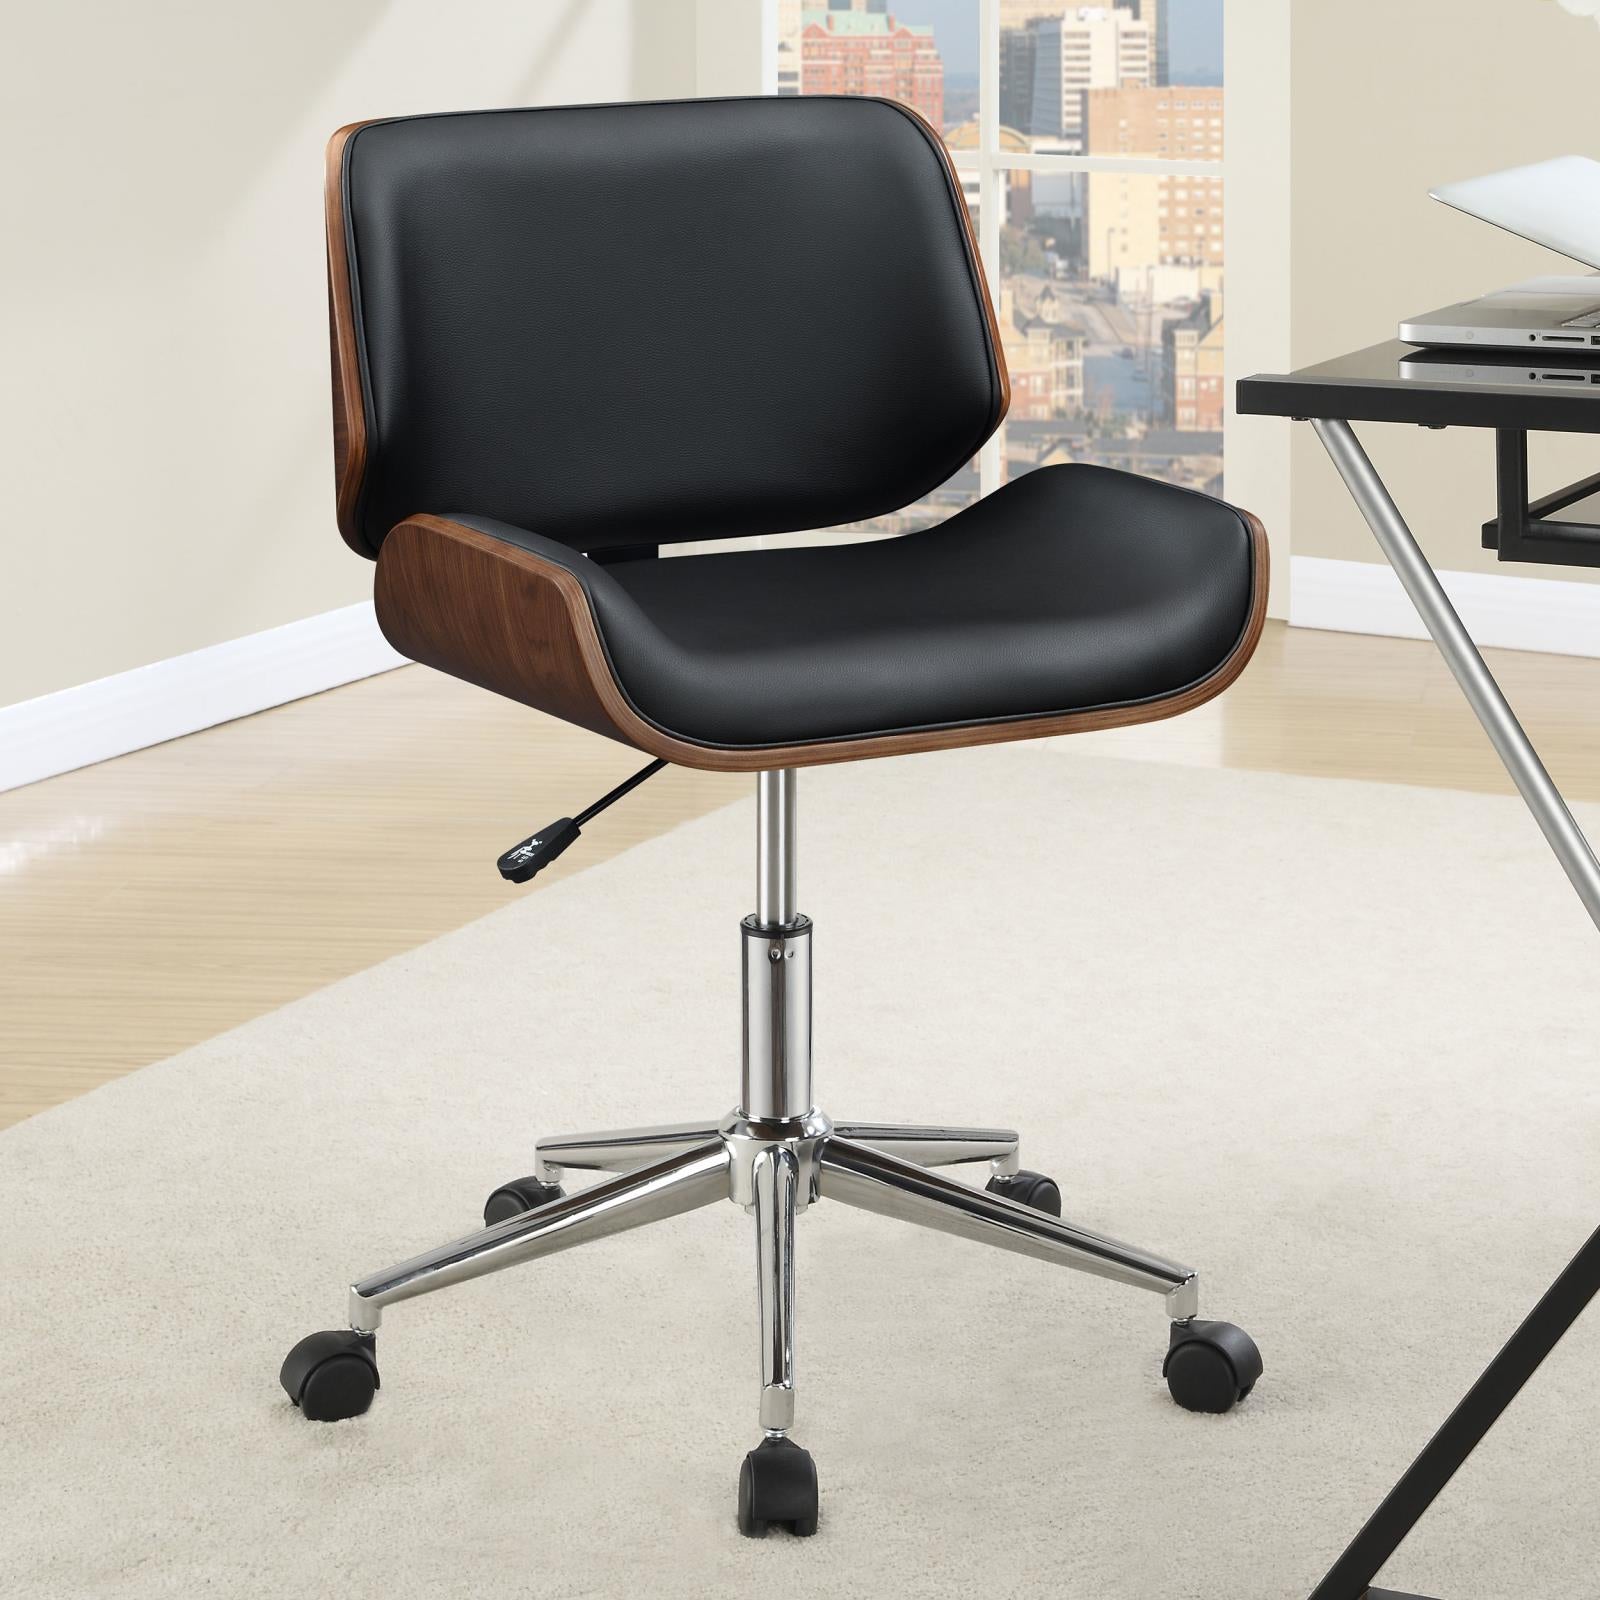 Black Upholstered With Walnut And Chrome Office Chair 800612